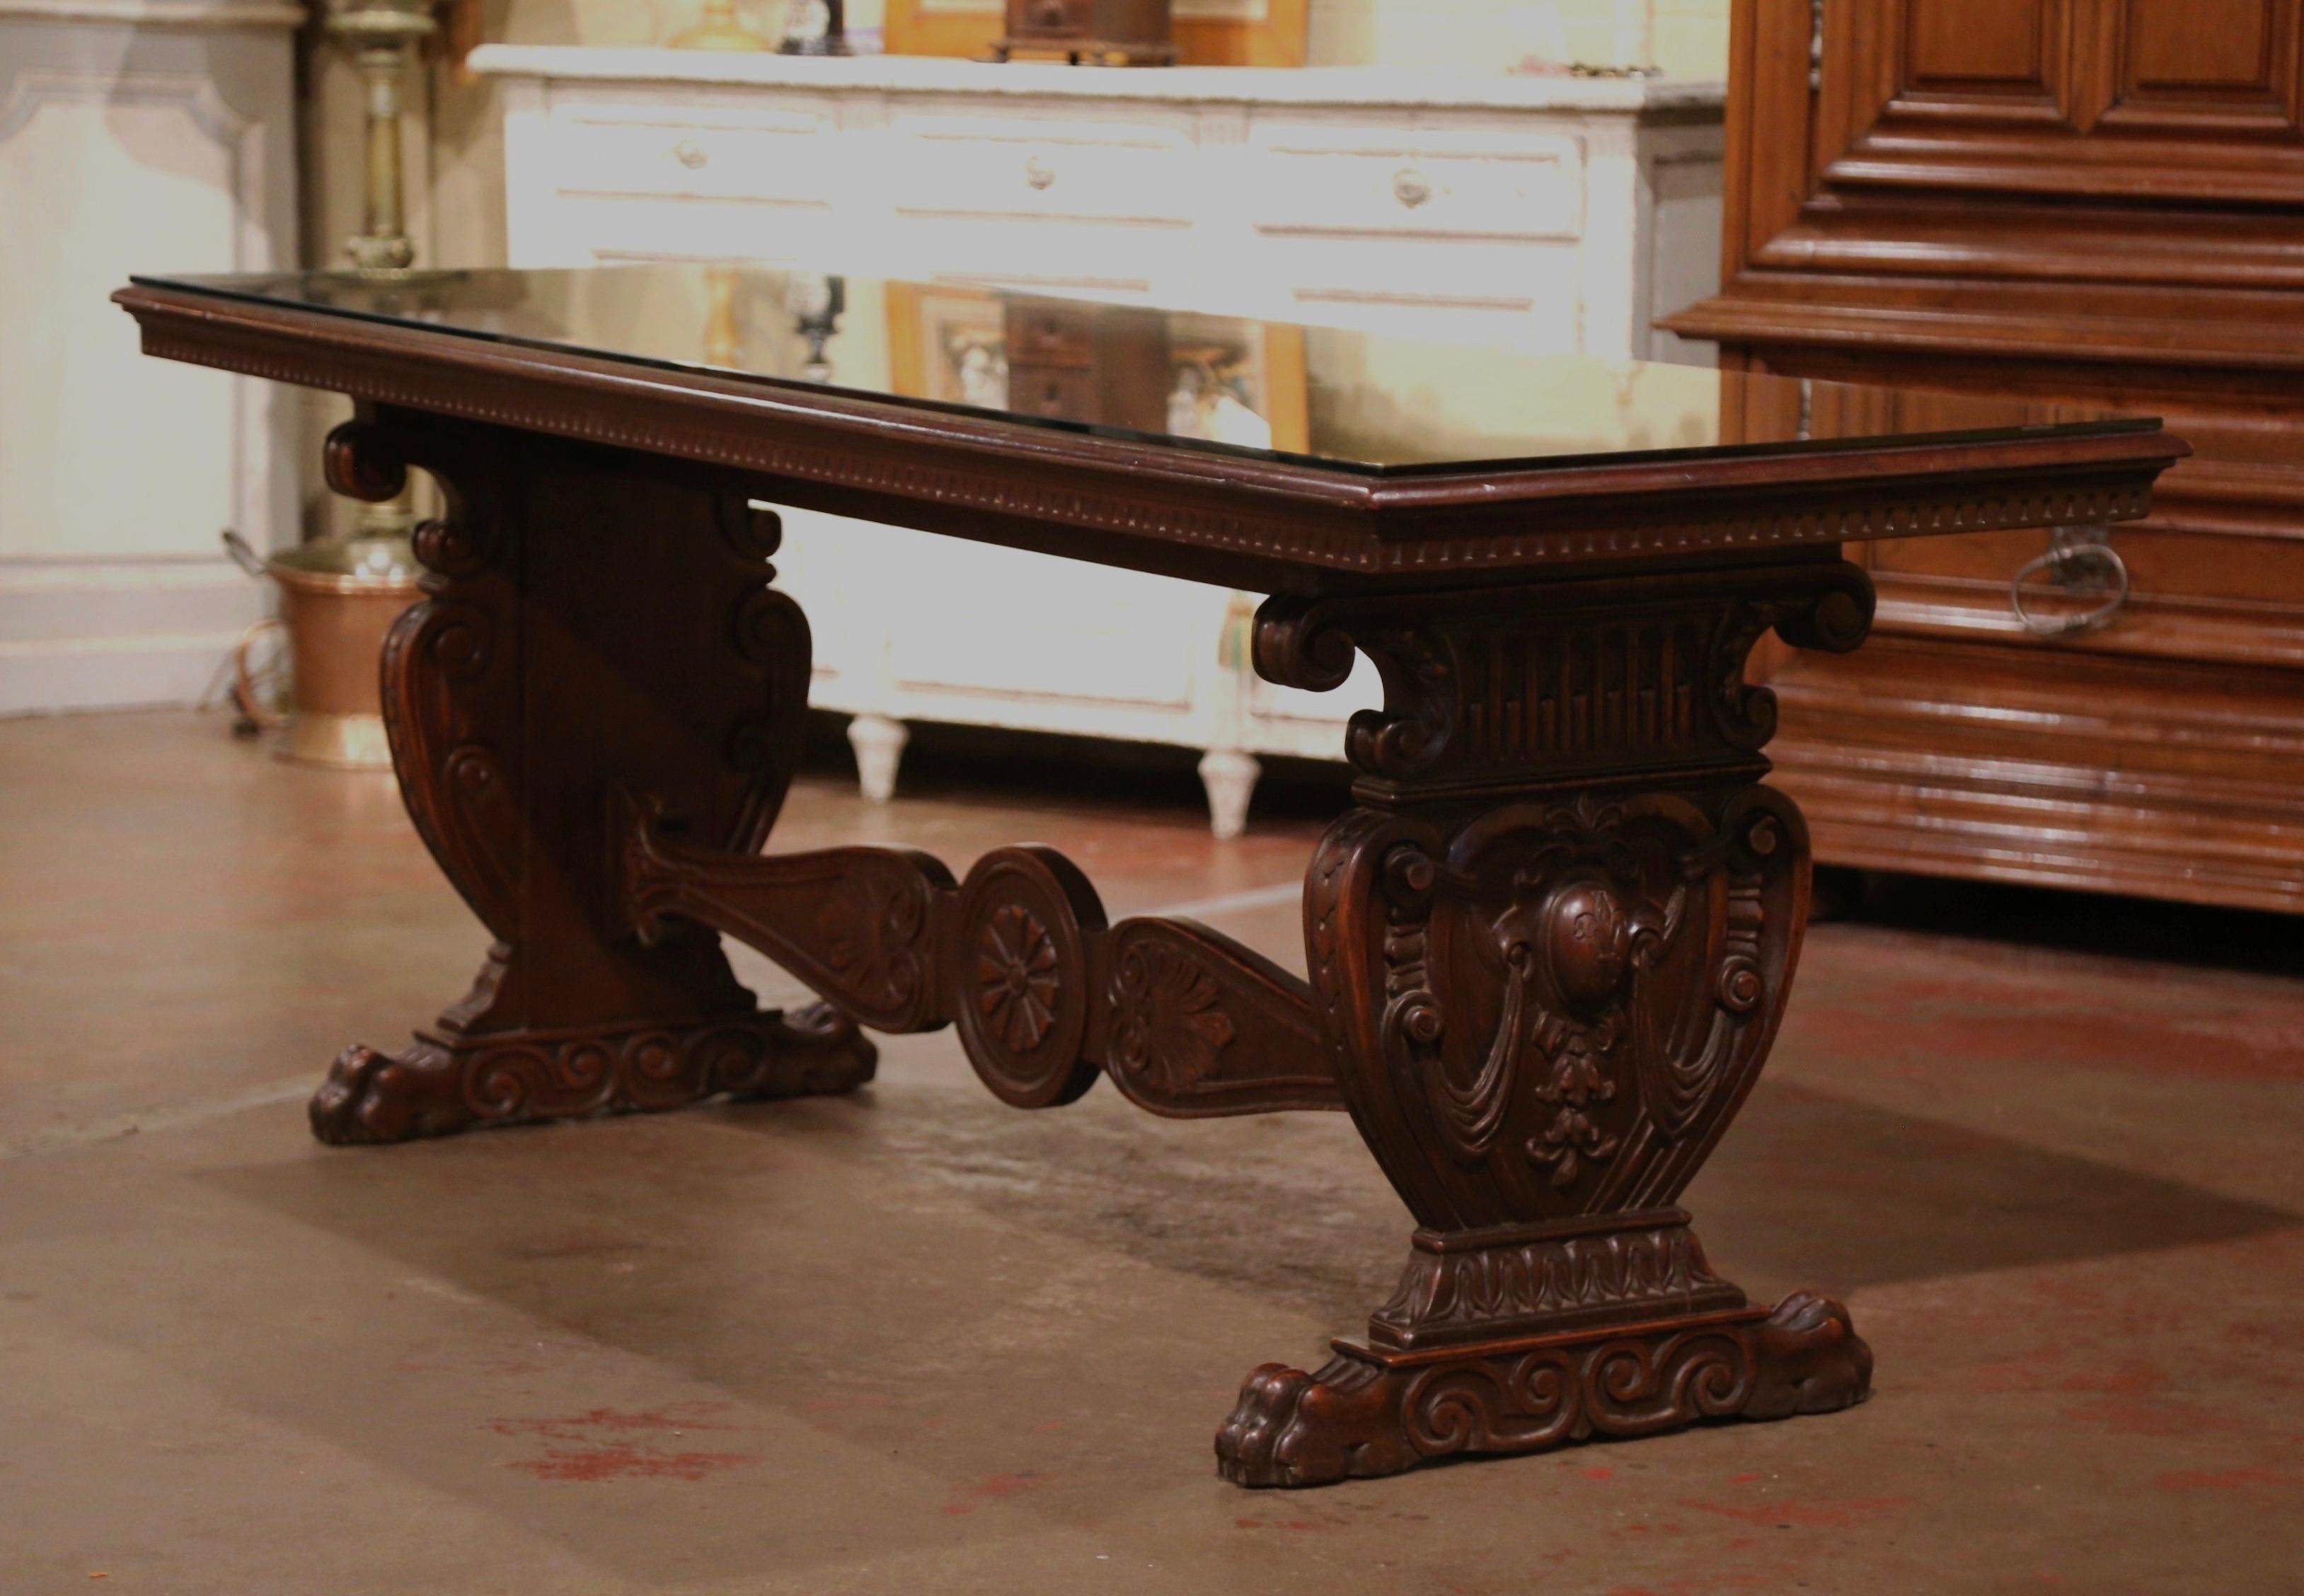 Bring the Italian elegance in your home with this important, antique Renaissance revival console table. Crafted in Italy circa 1920 and built of mahogany wood, the trestle table stands on carved pedestal legs ending with paw feet. Both scrolled legs